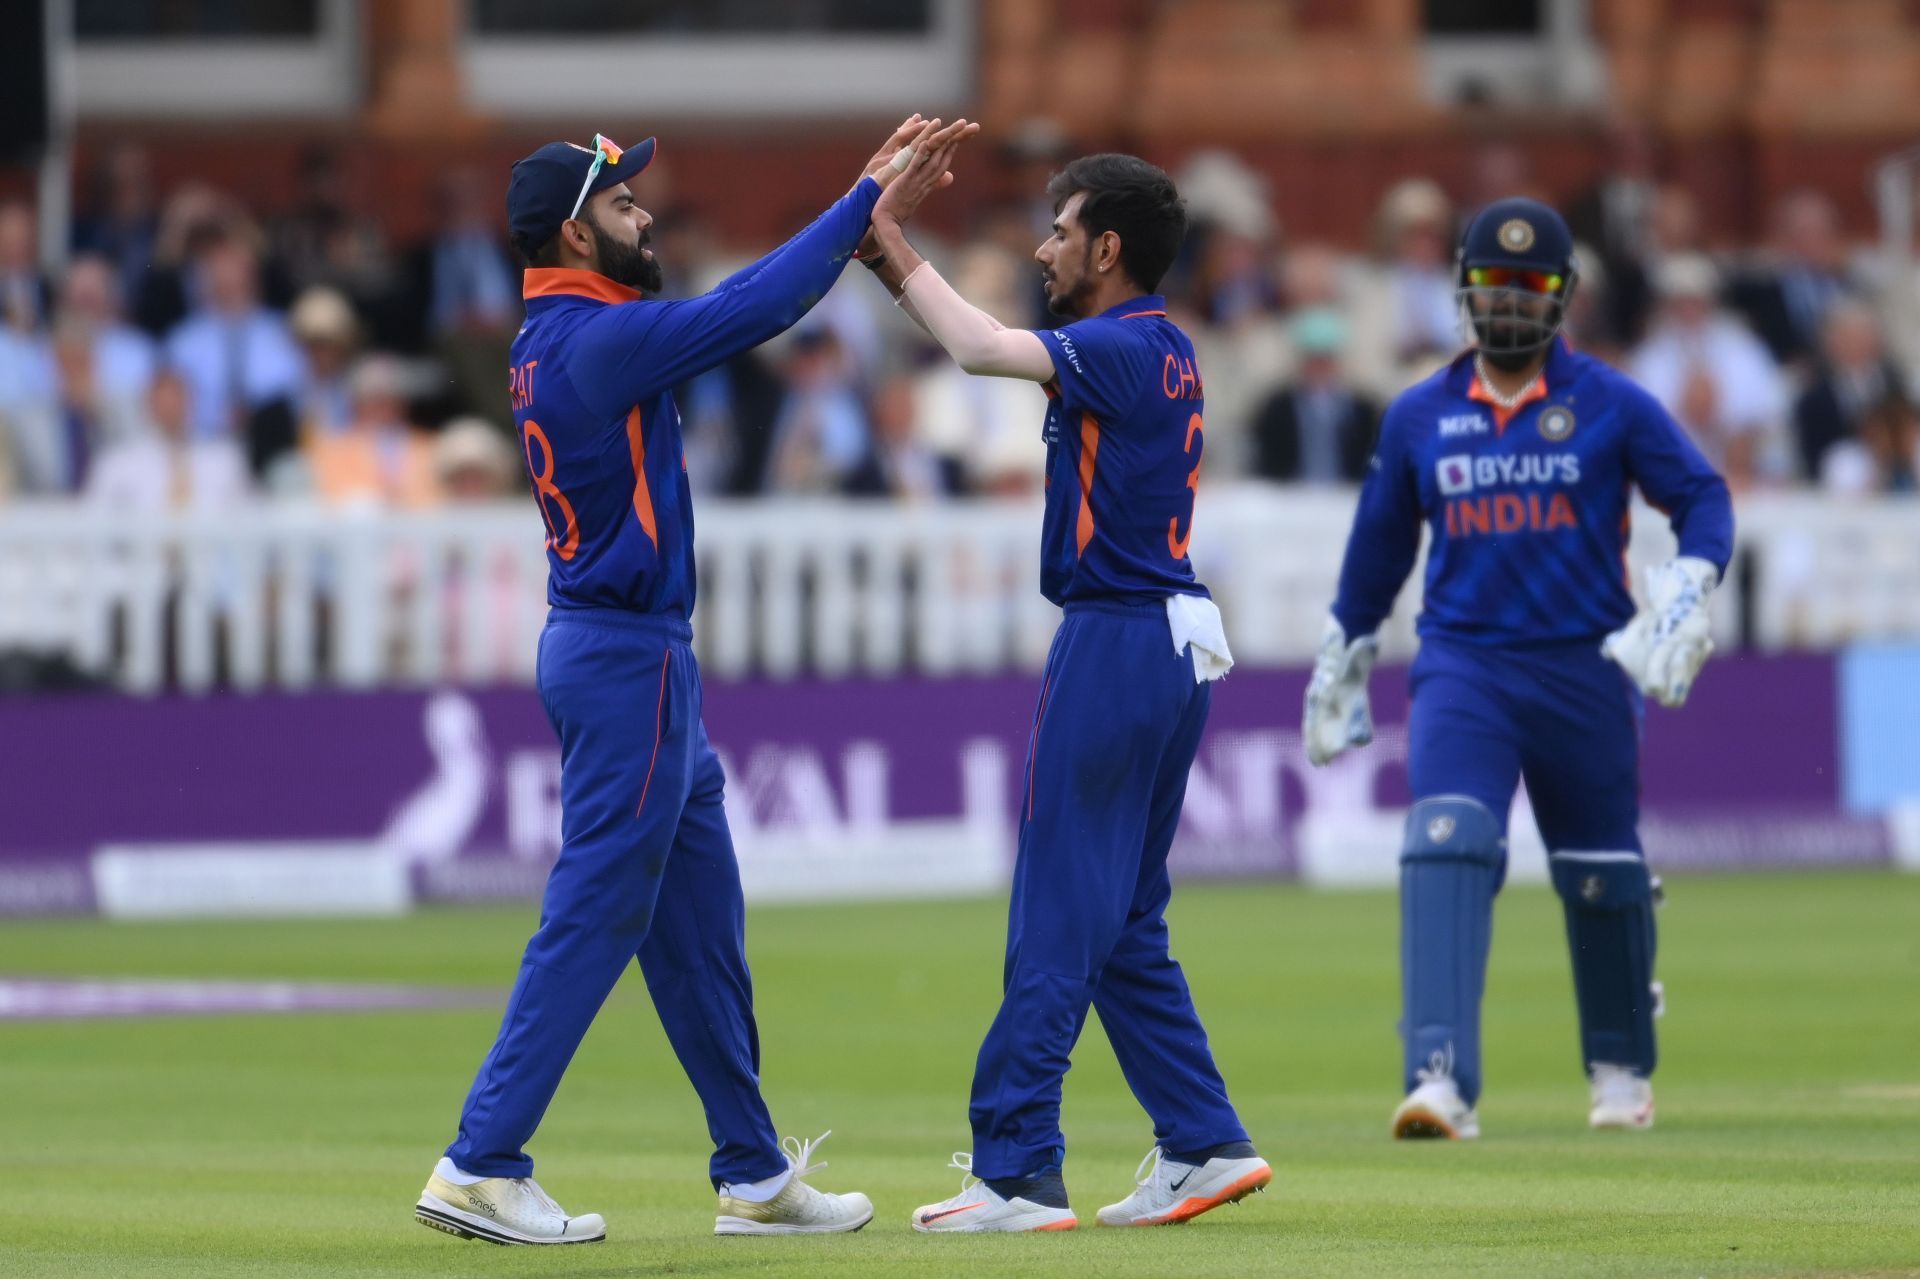 Yuzvendra Chahal has been in excellent wicket-taking form of late